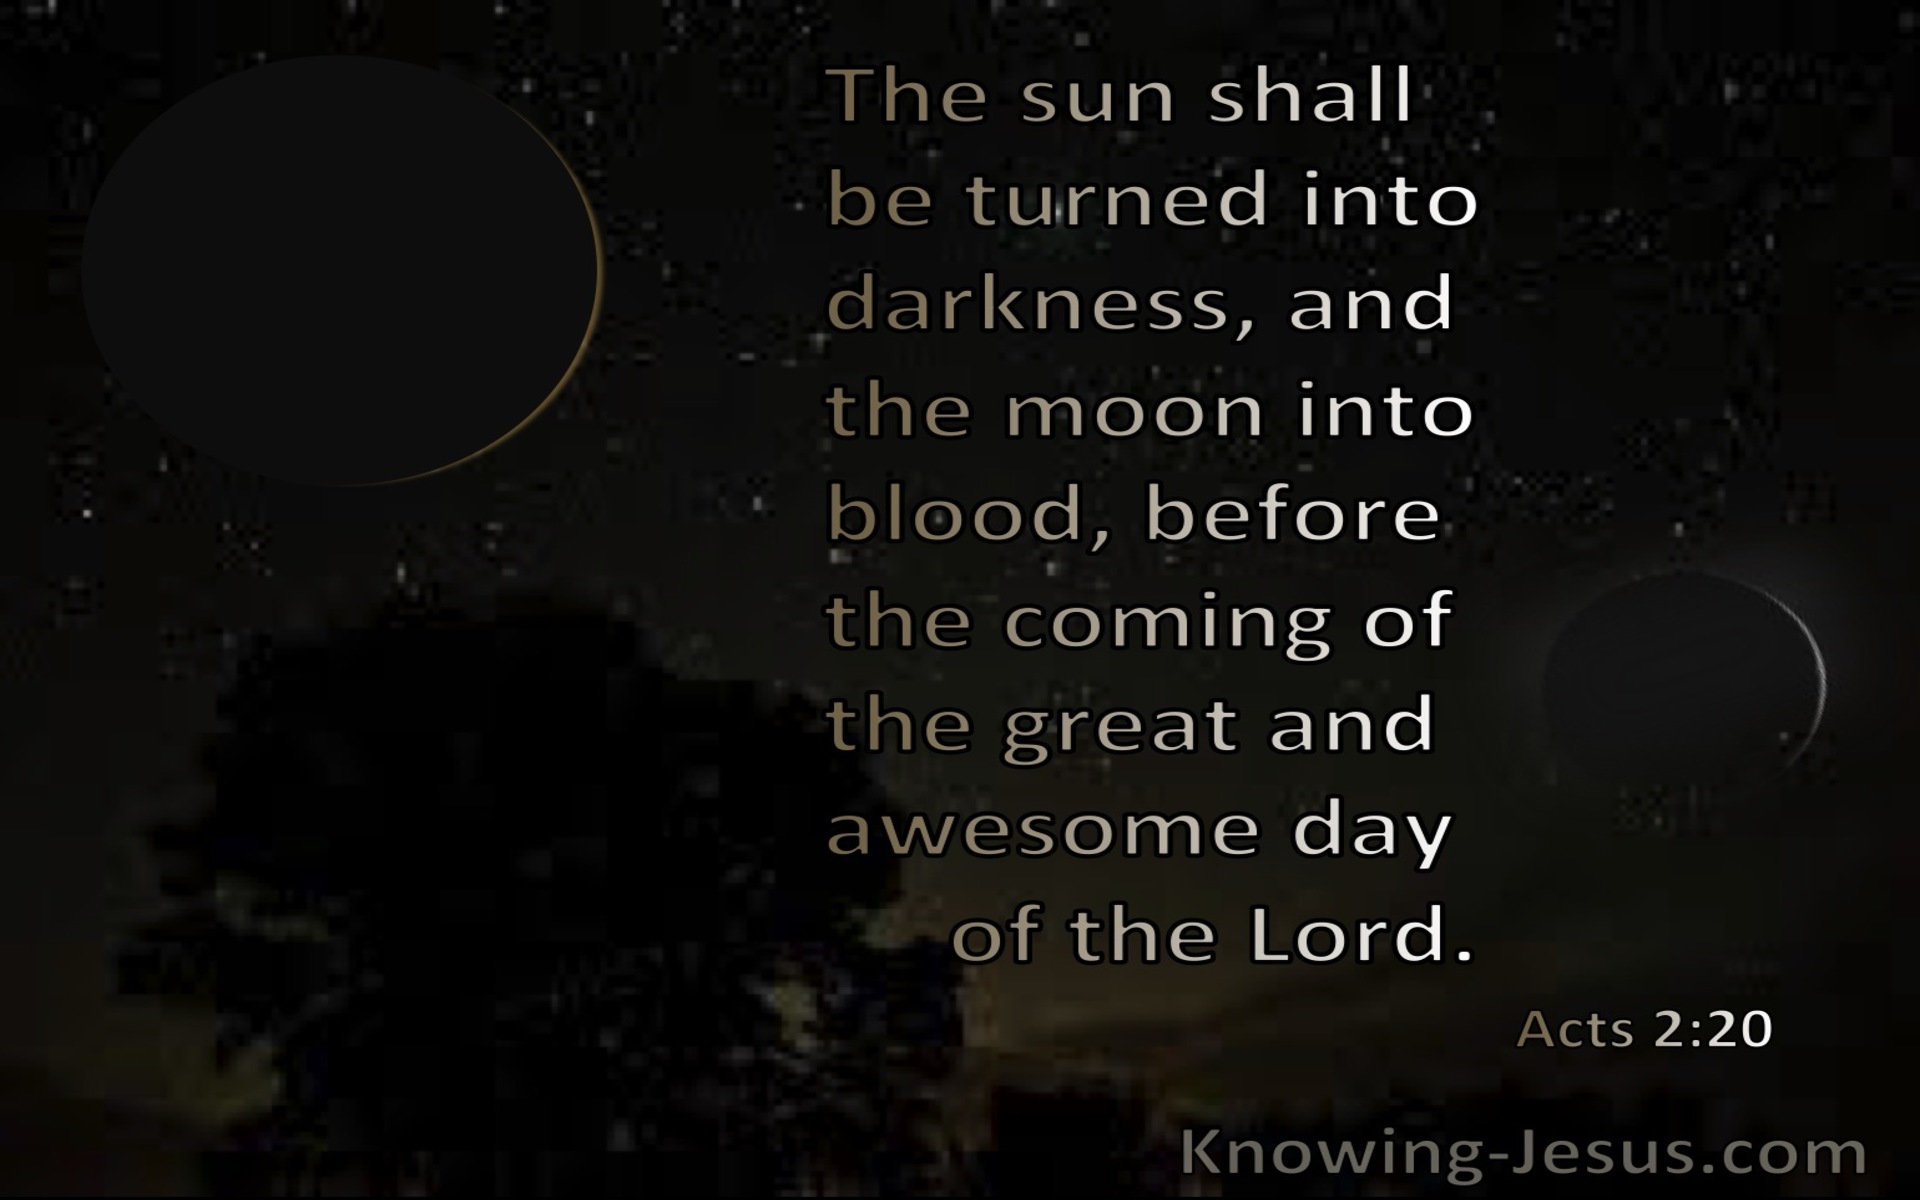 Acts 2:20 The Sun Shall Be Turned To Darkness And The Moon To Blood Before The Awesome Day Of The Lord (black)